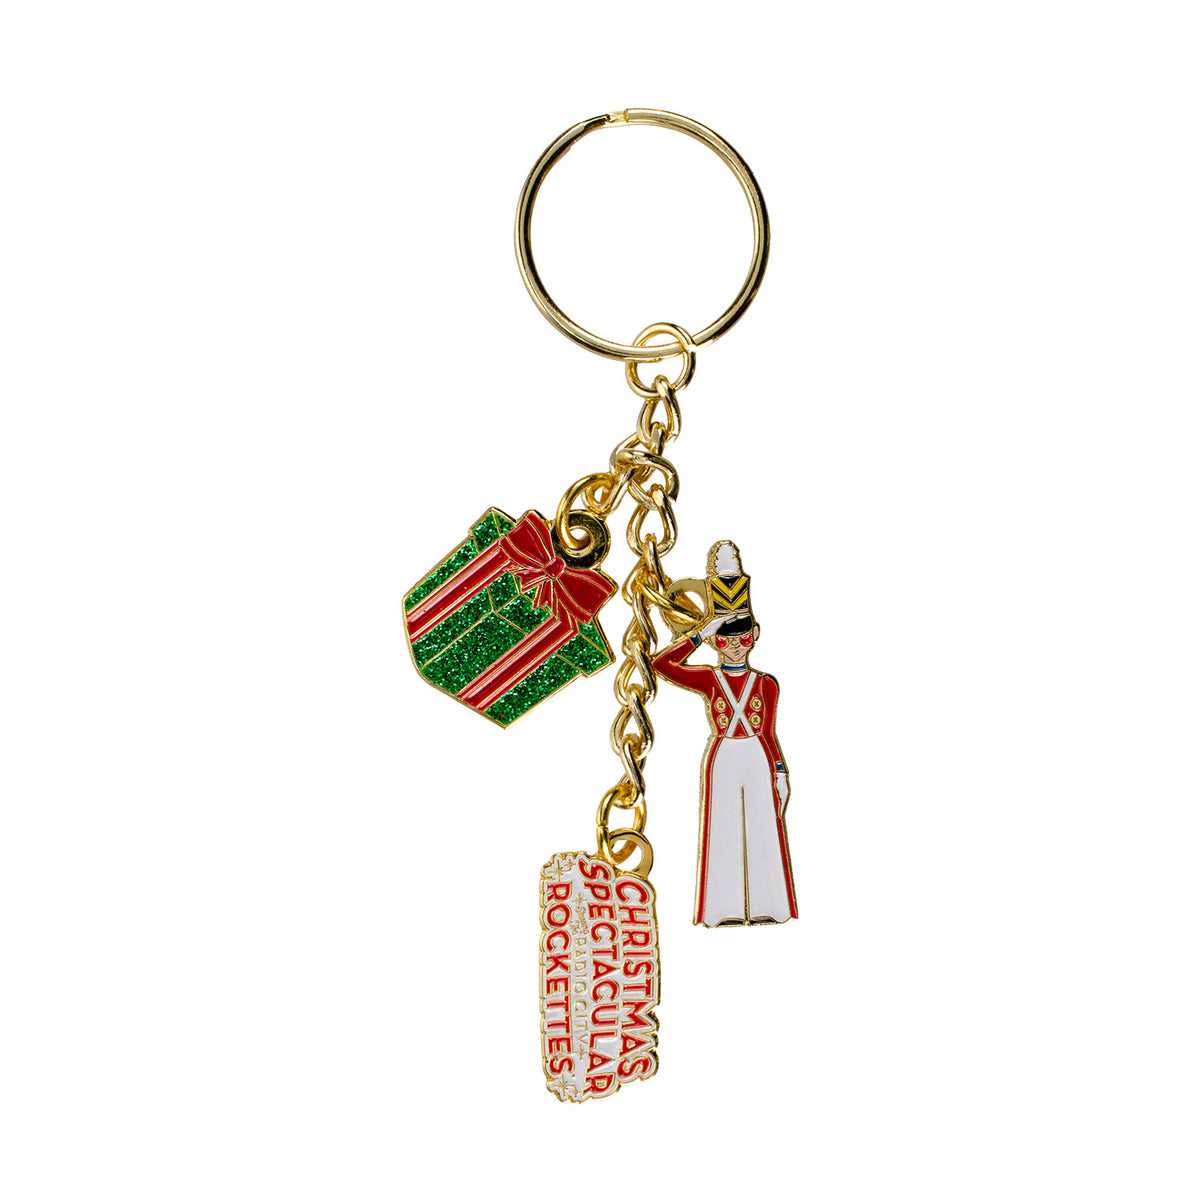 Falling Soldiers Keychain In Gold, Green, Red &amp; White - Front View